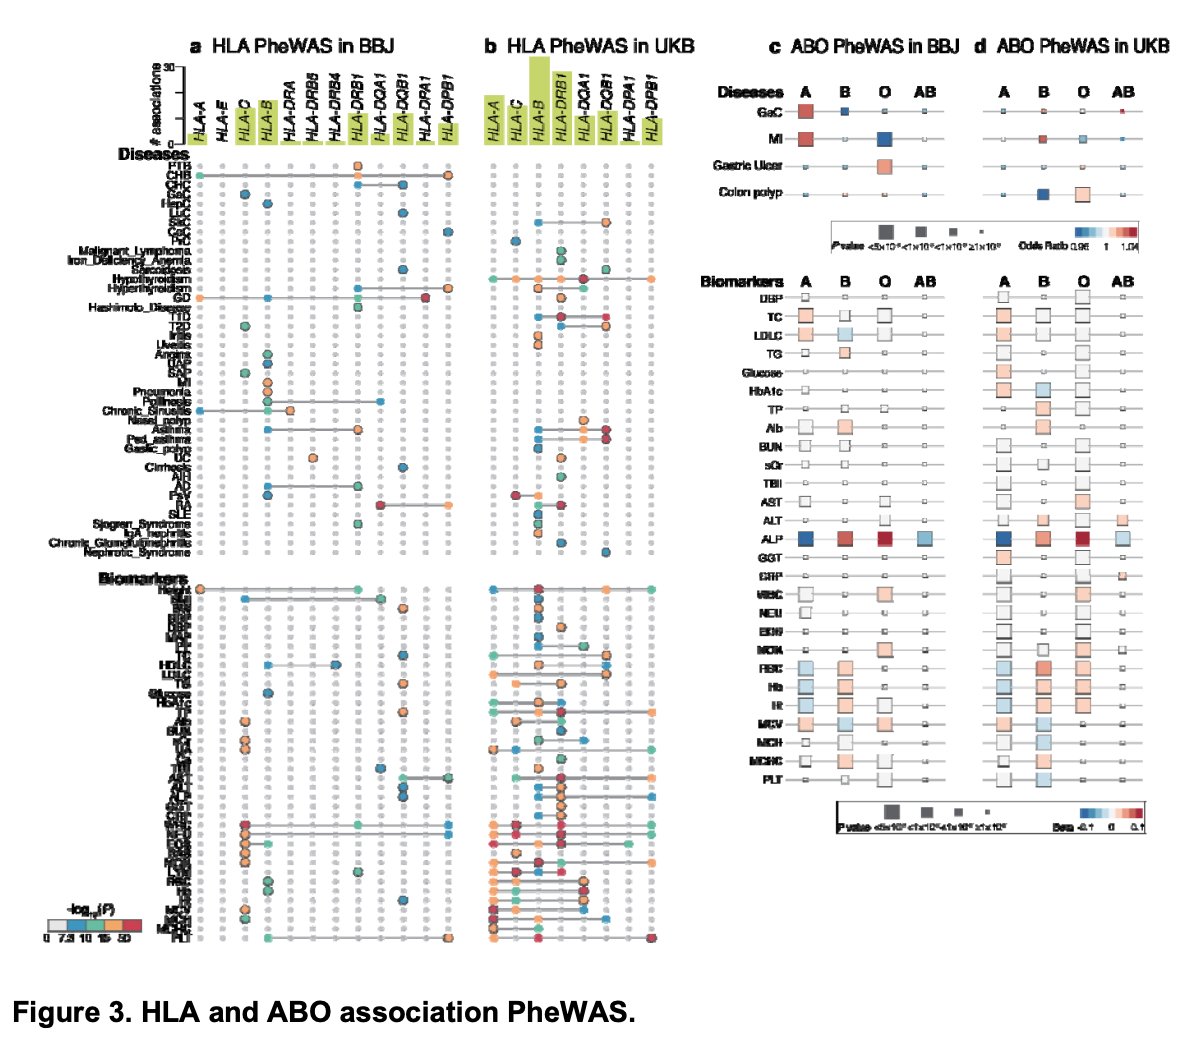 a beautiful paper on atlas of genetic associations of 220 phenotypes between east asian and european of ~800K inds from @saorisakaue, @masakanai @okada_yukinori and colleagues including HLA fine-mapping! medrxiv.org/content/10.110…. full summary stats from:pheweb.jp